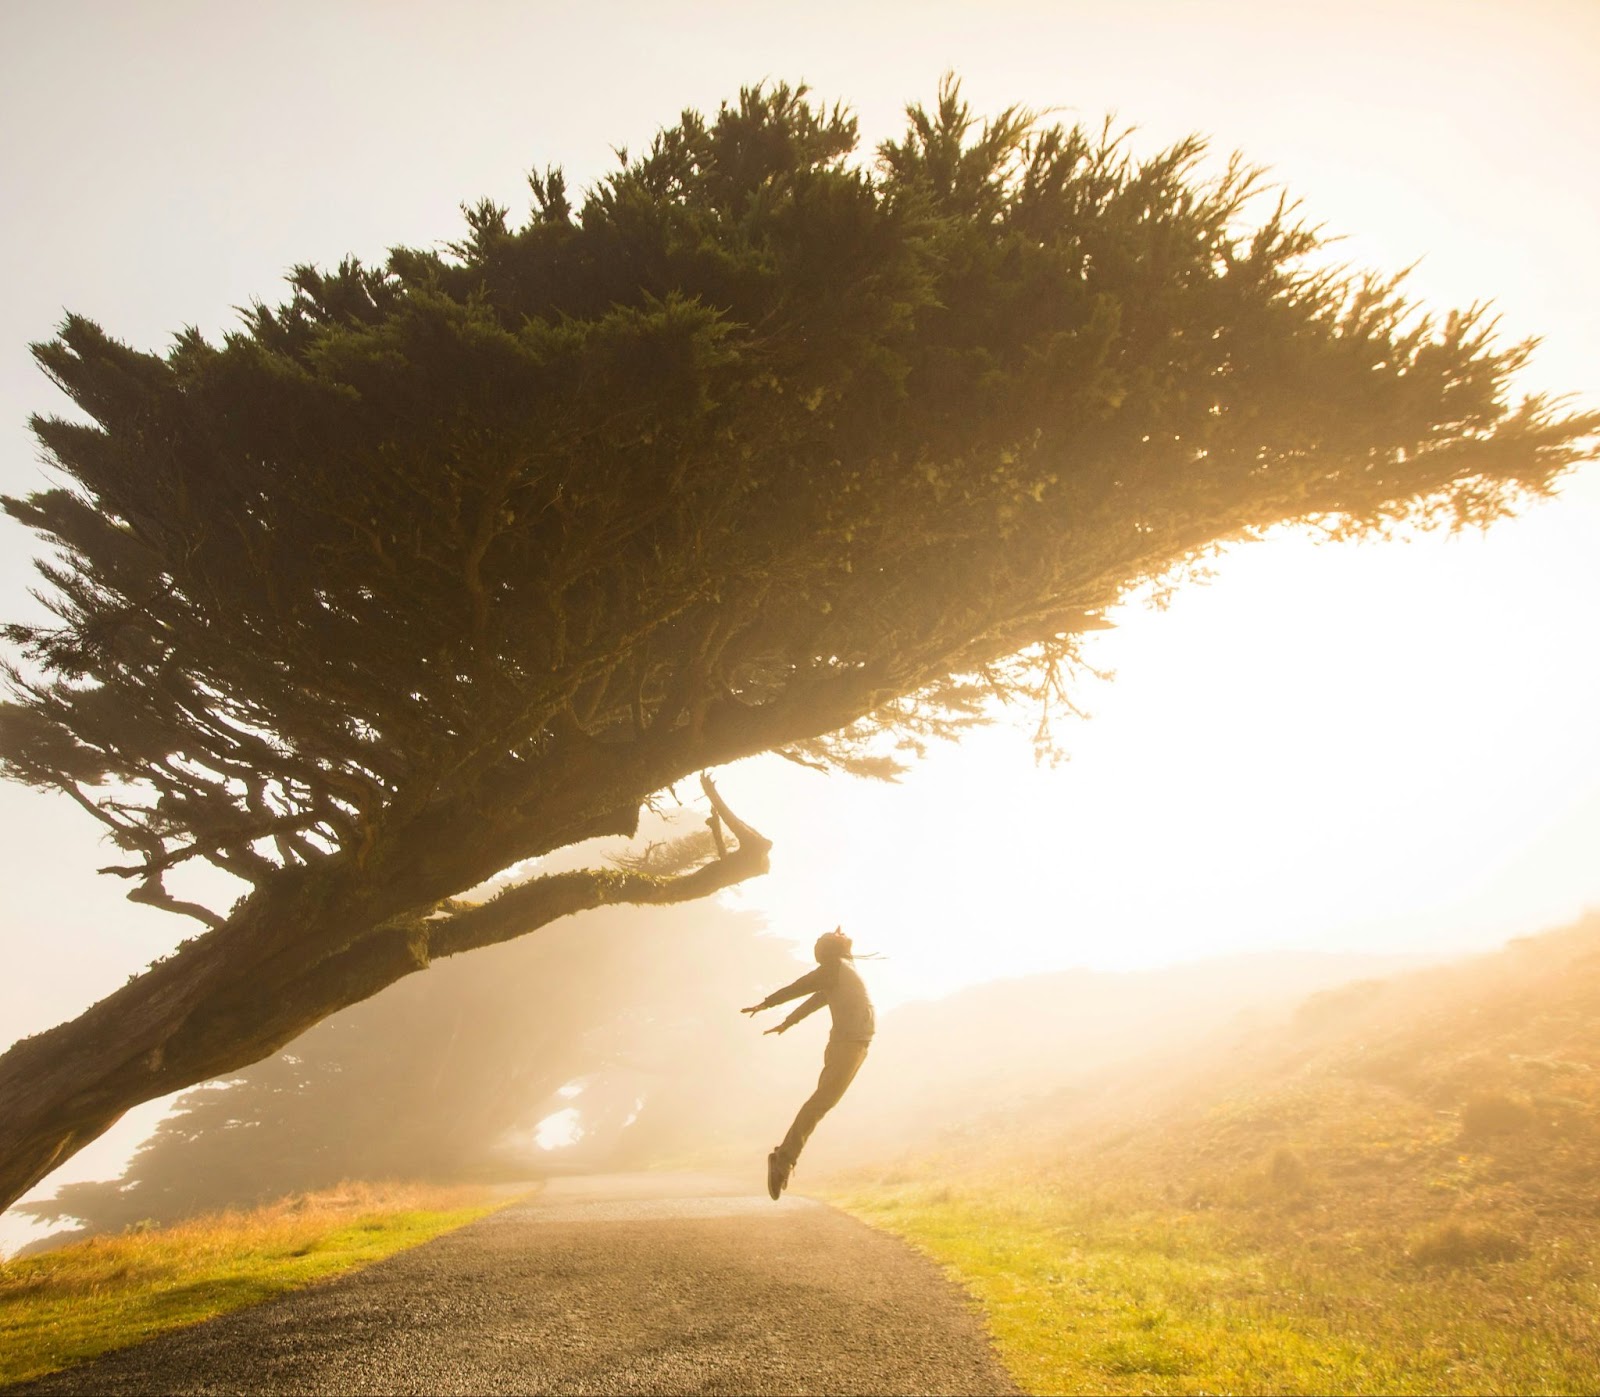 Image of figure leaping in nature.